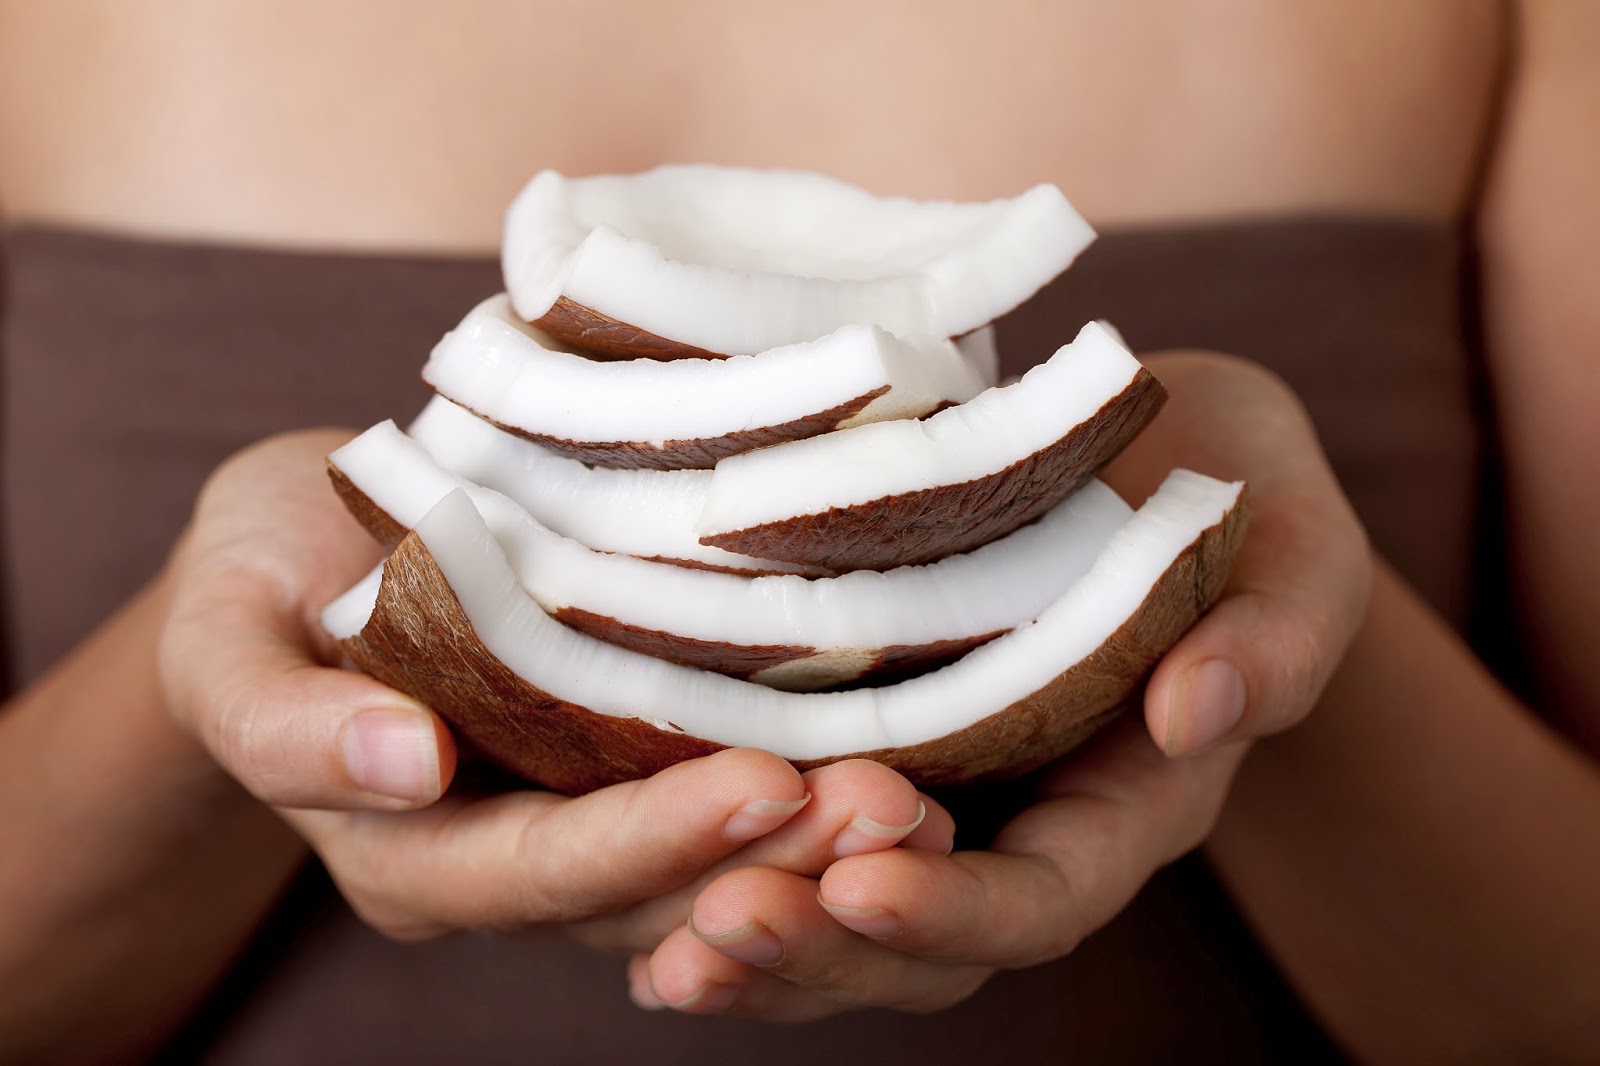 Female hands holding slices of coconut